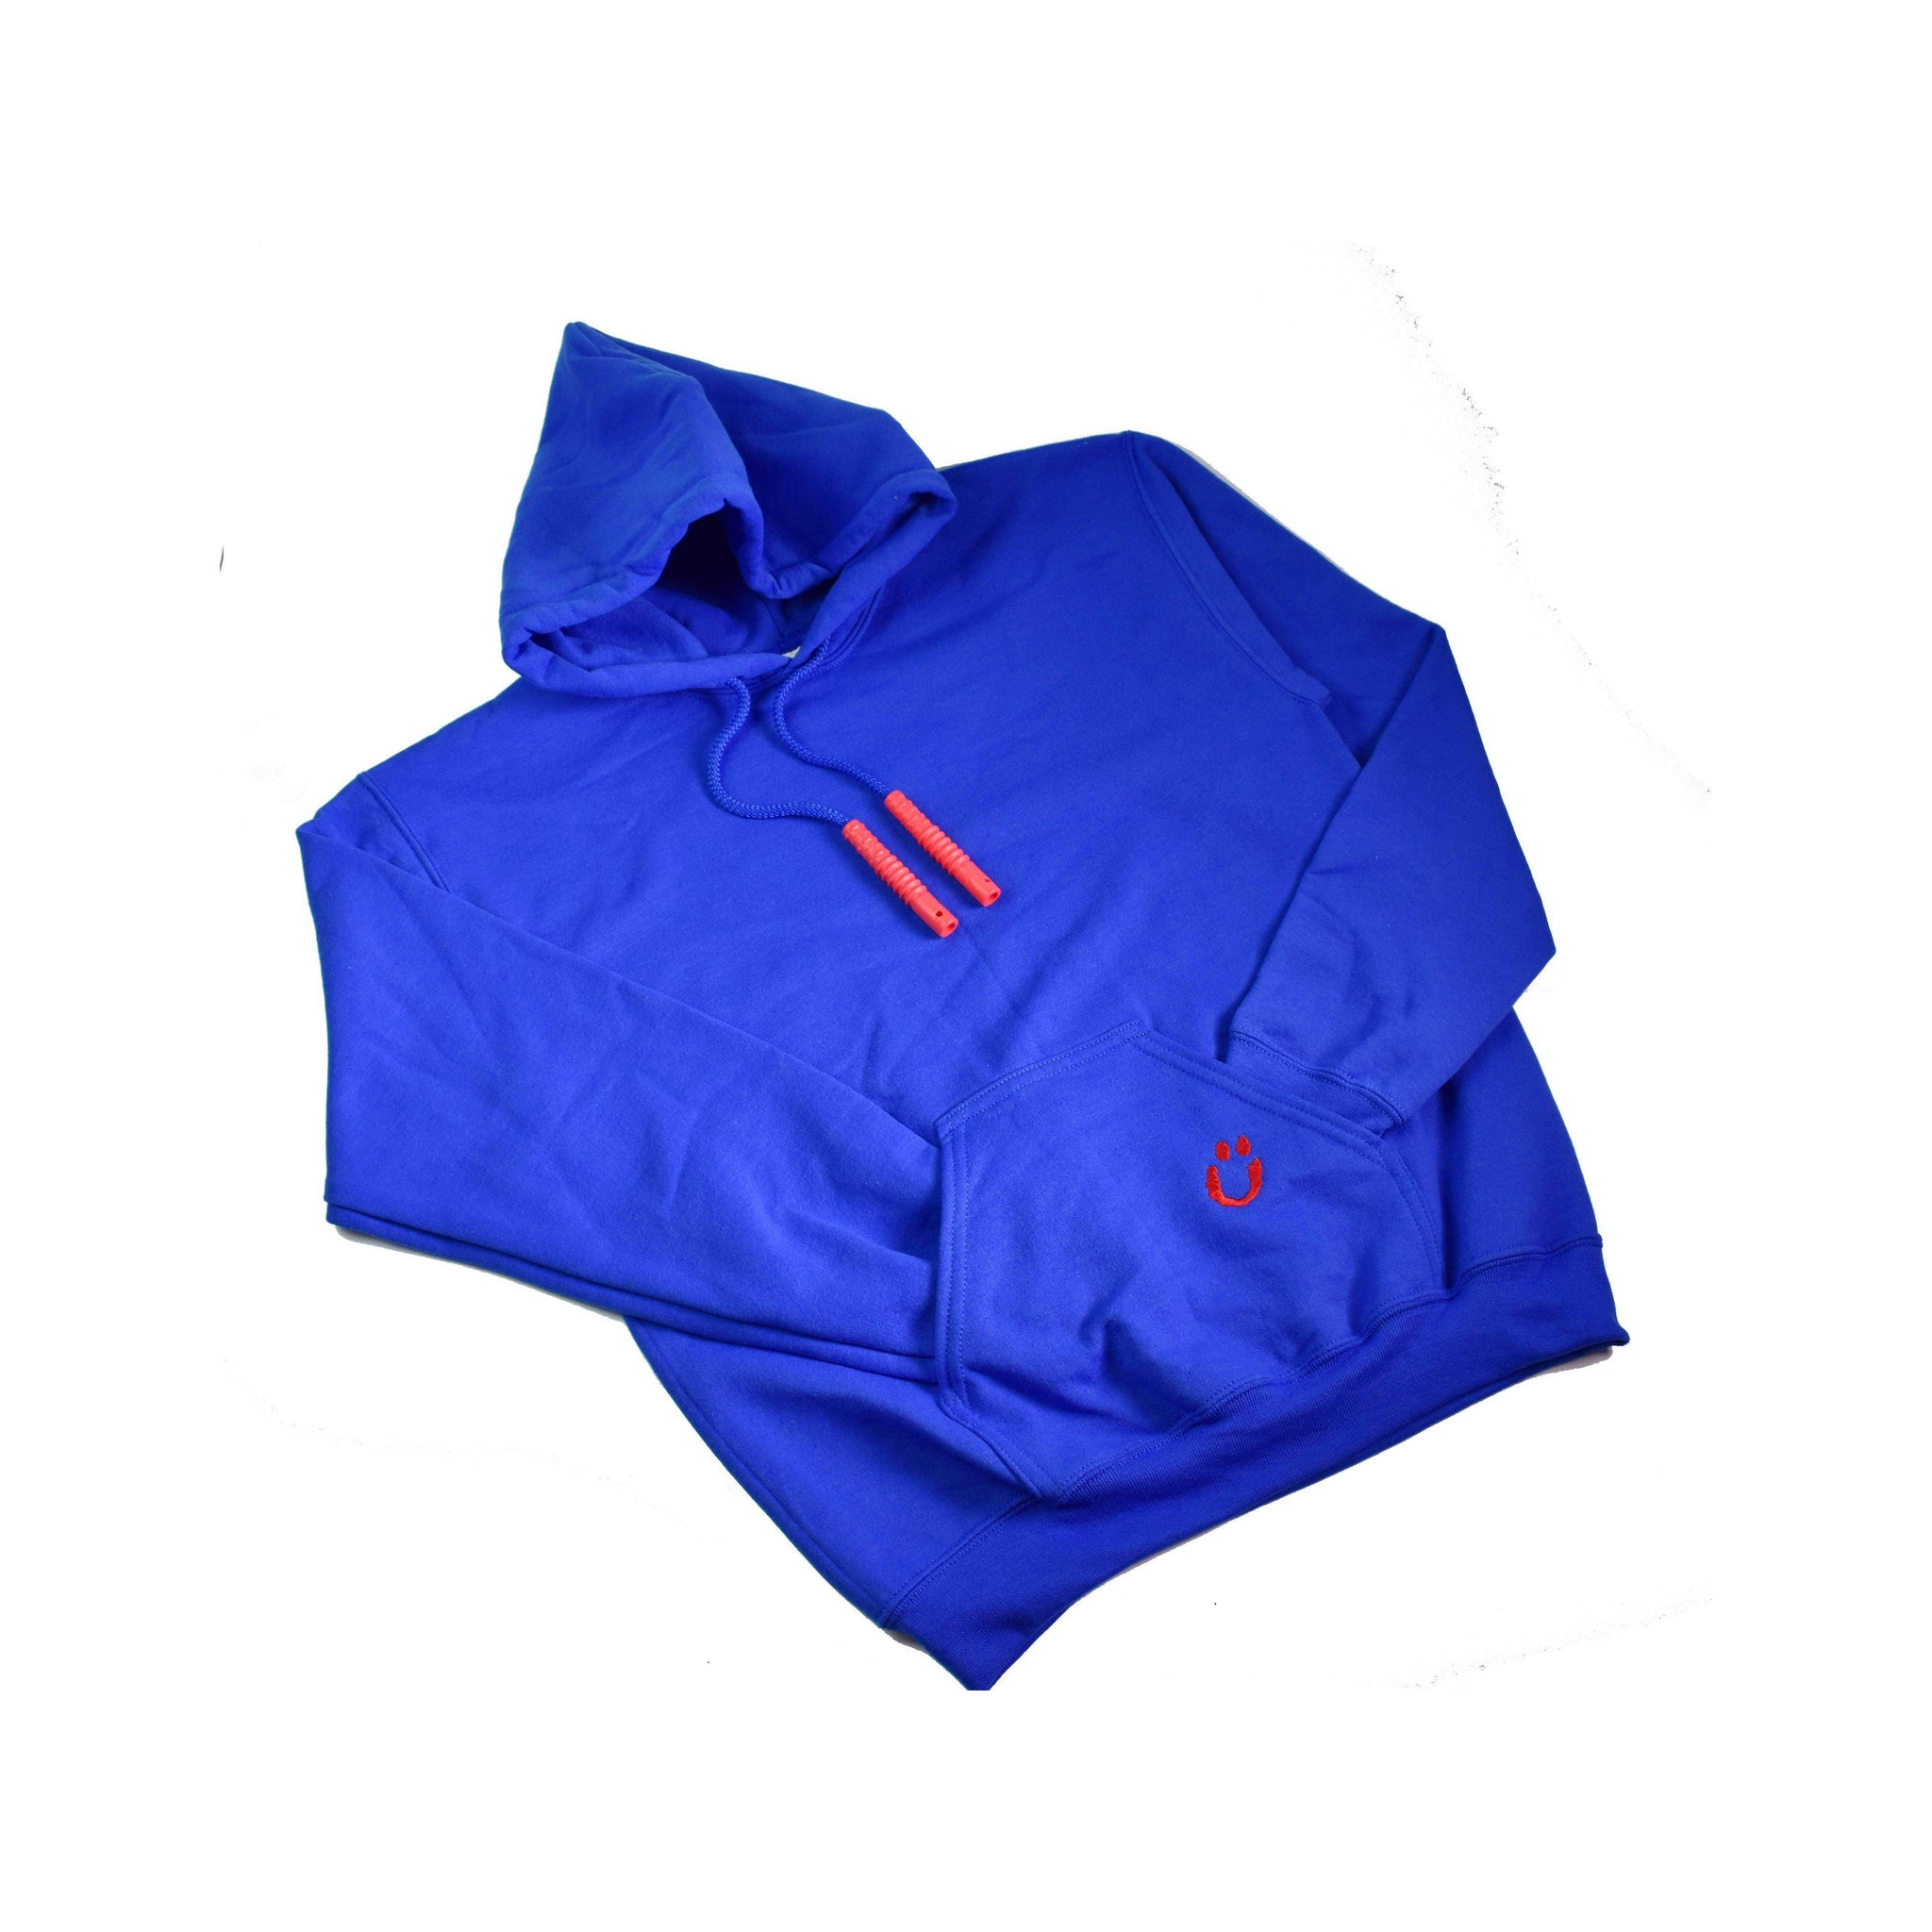 ChuBuddy Hood Zilla Royal Blue Adult with Red Cord Zillas